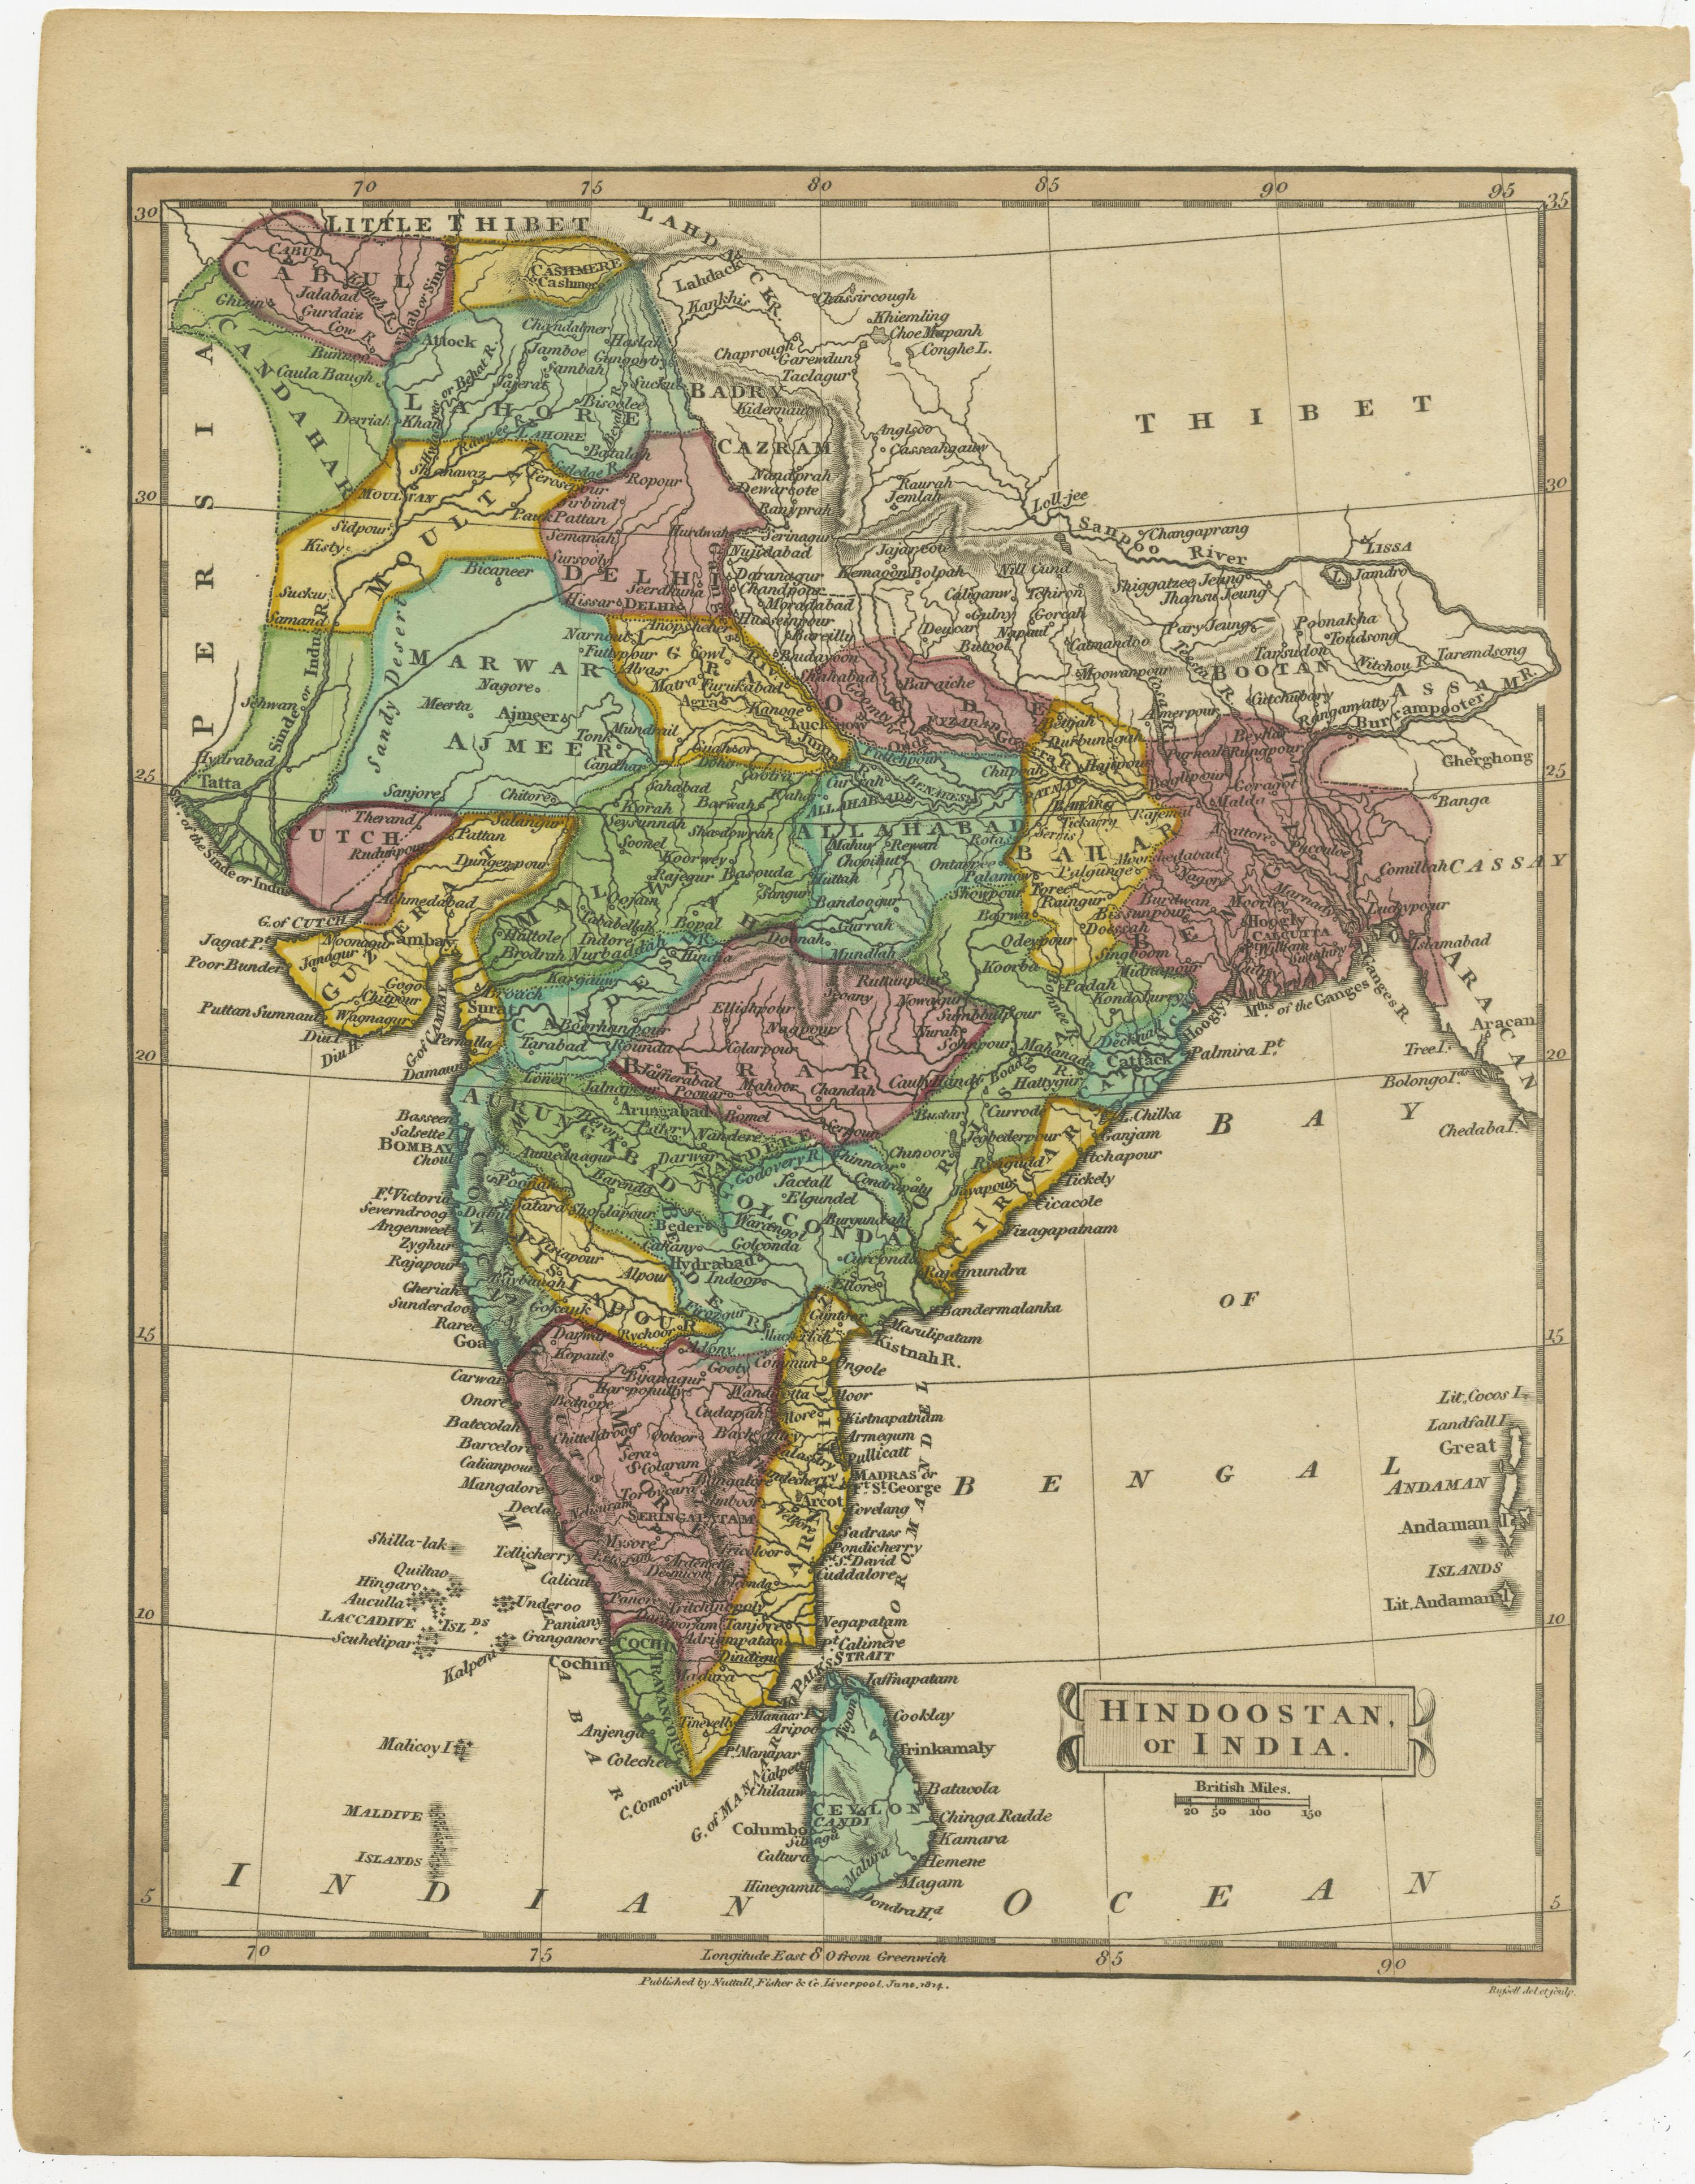 Antique map titled 'Hindoostan, or India'. Original antique map of India (Hindustan) and Sri Lanka (Ceylon). Engraved by Russell. Published by Nuttall, Fisher & Co, 1814. 